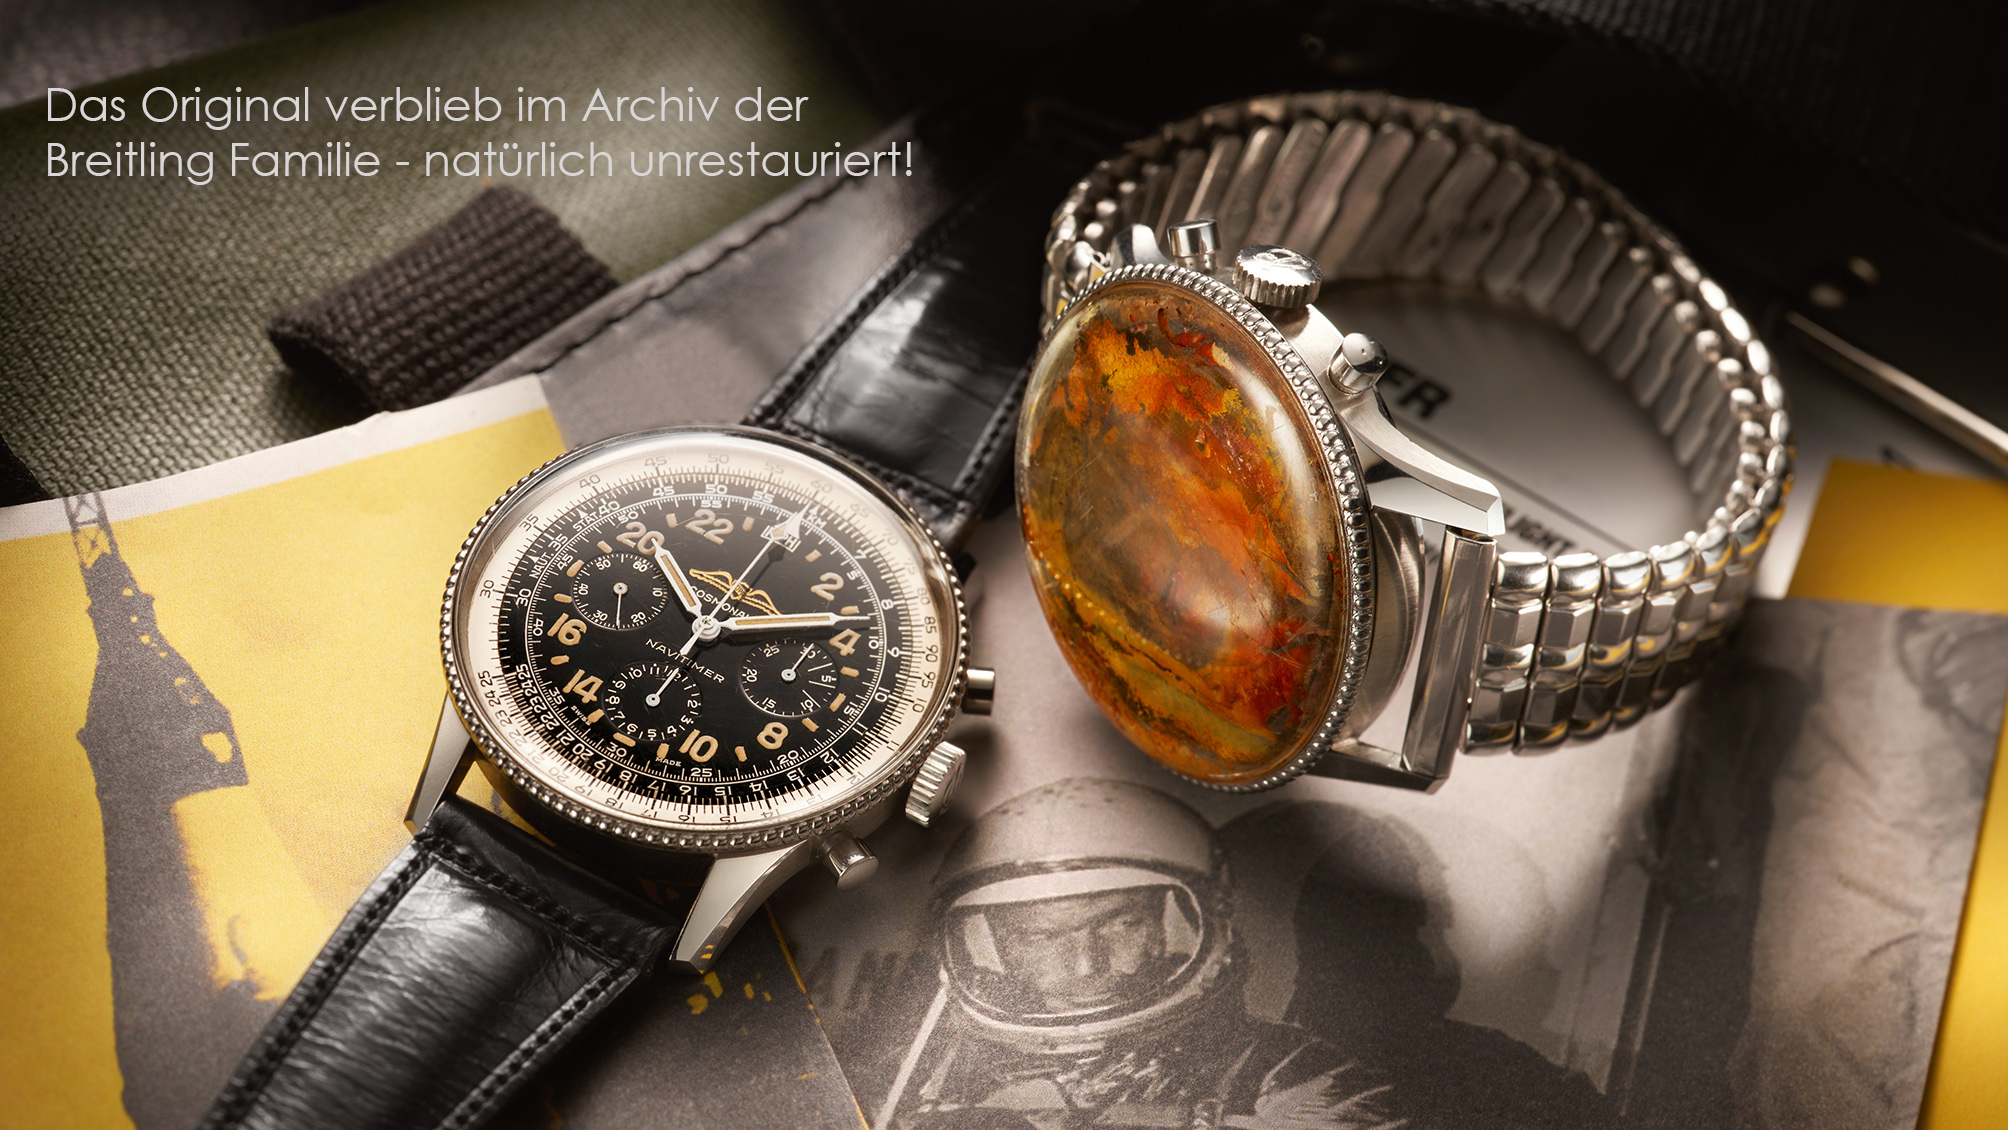 Historical Breitling Navitimer Cosmonaute from 1962 and the original Navitimer Cosmonaute/ first Swiss wristwatch in space worn by Scott Carpenter during his Mercury-Atlas 7 mission in 1962 (left to right)_RGB